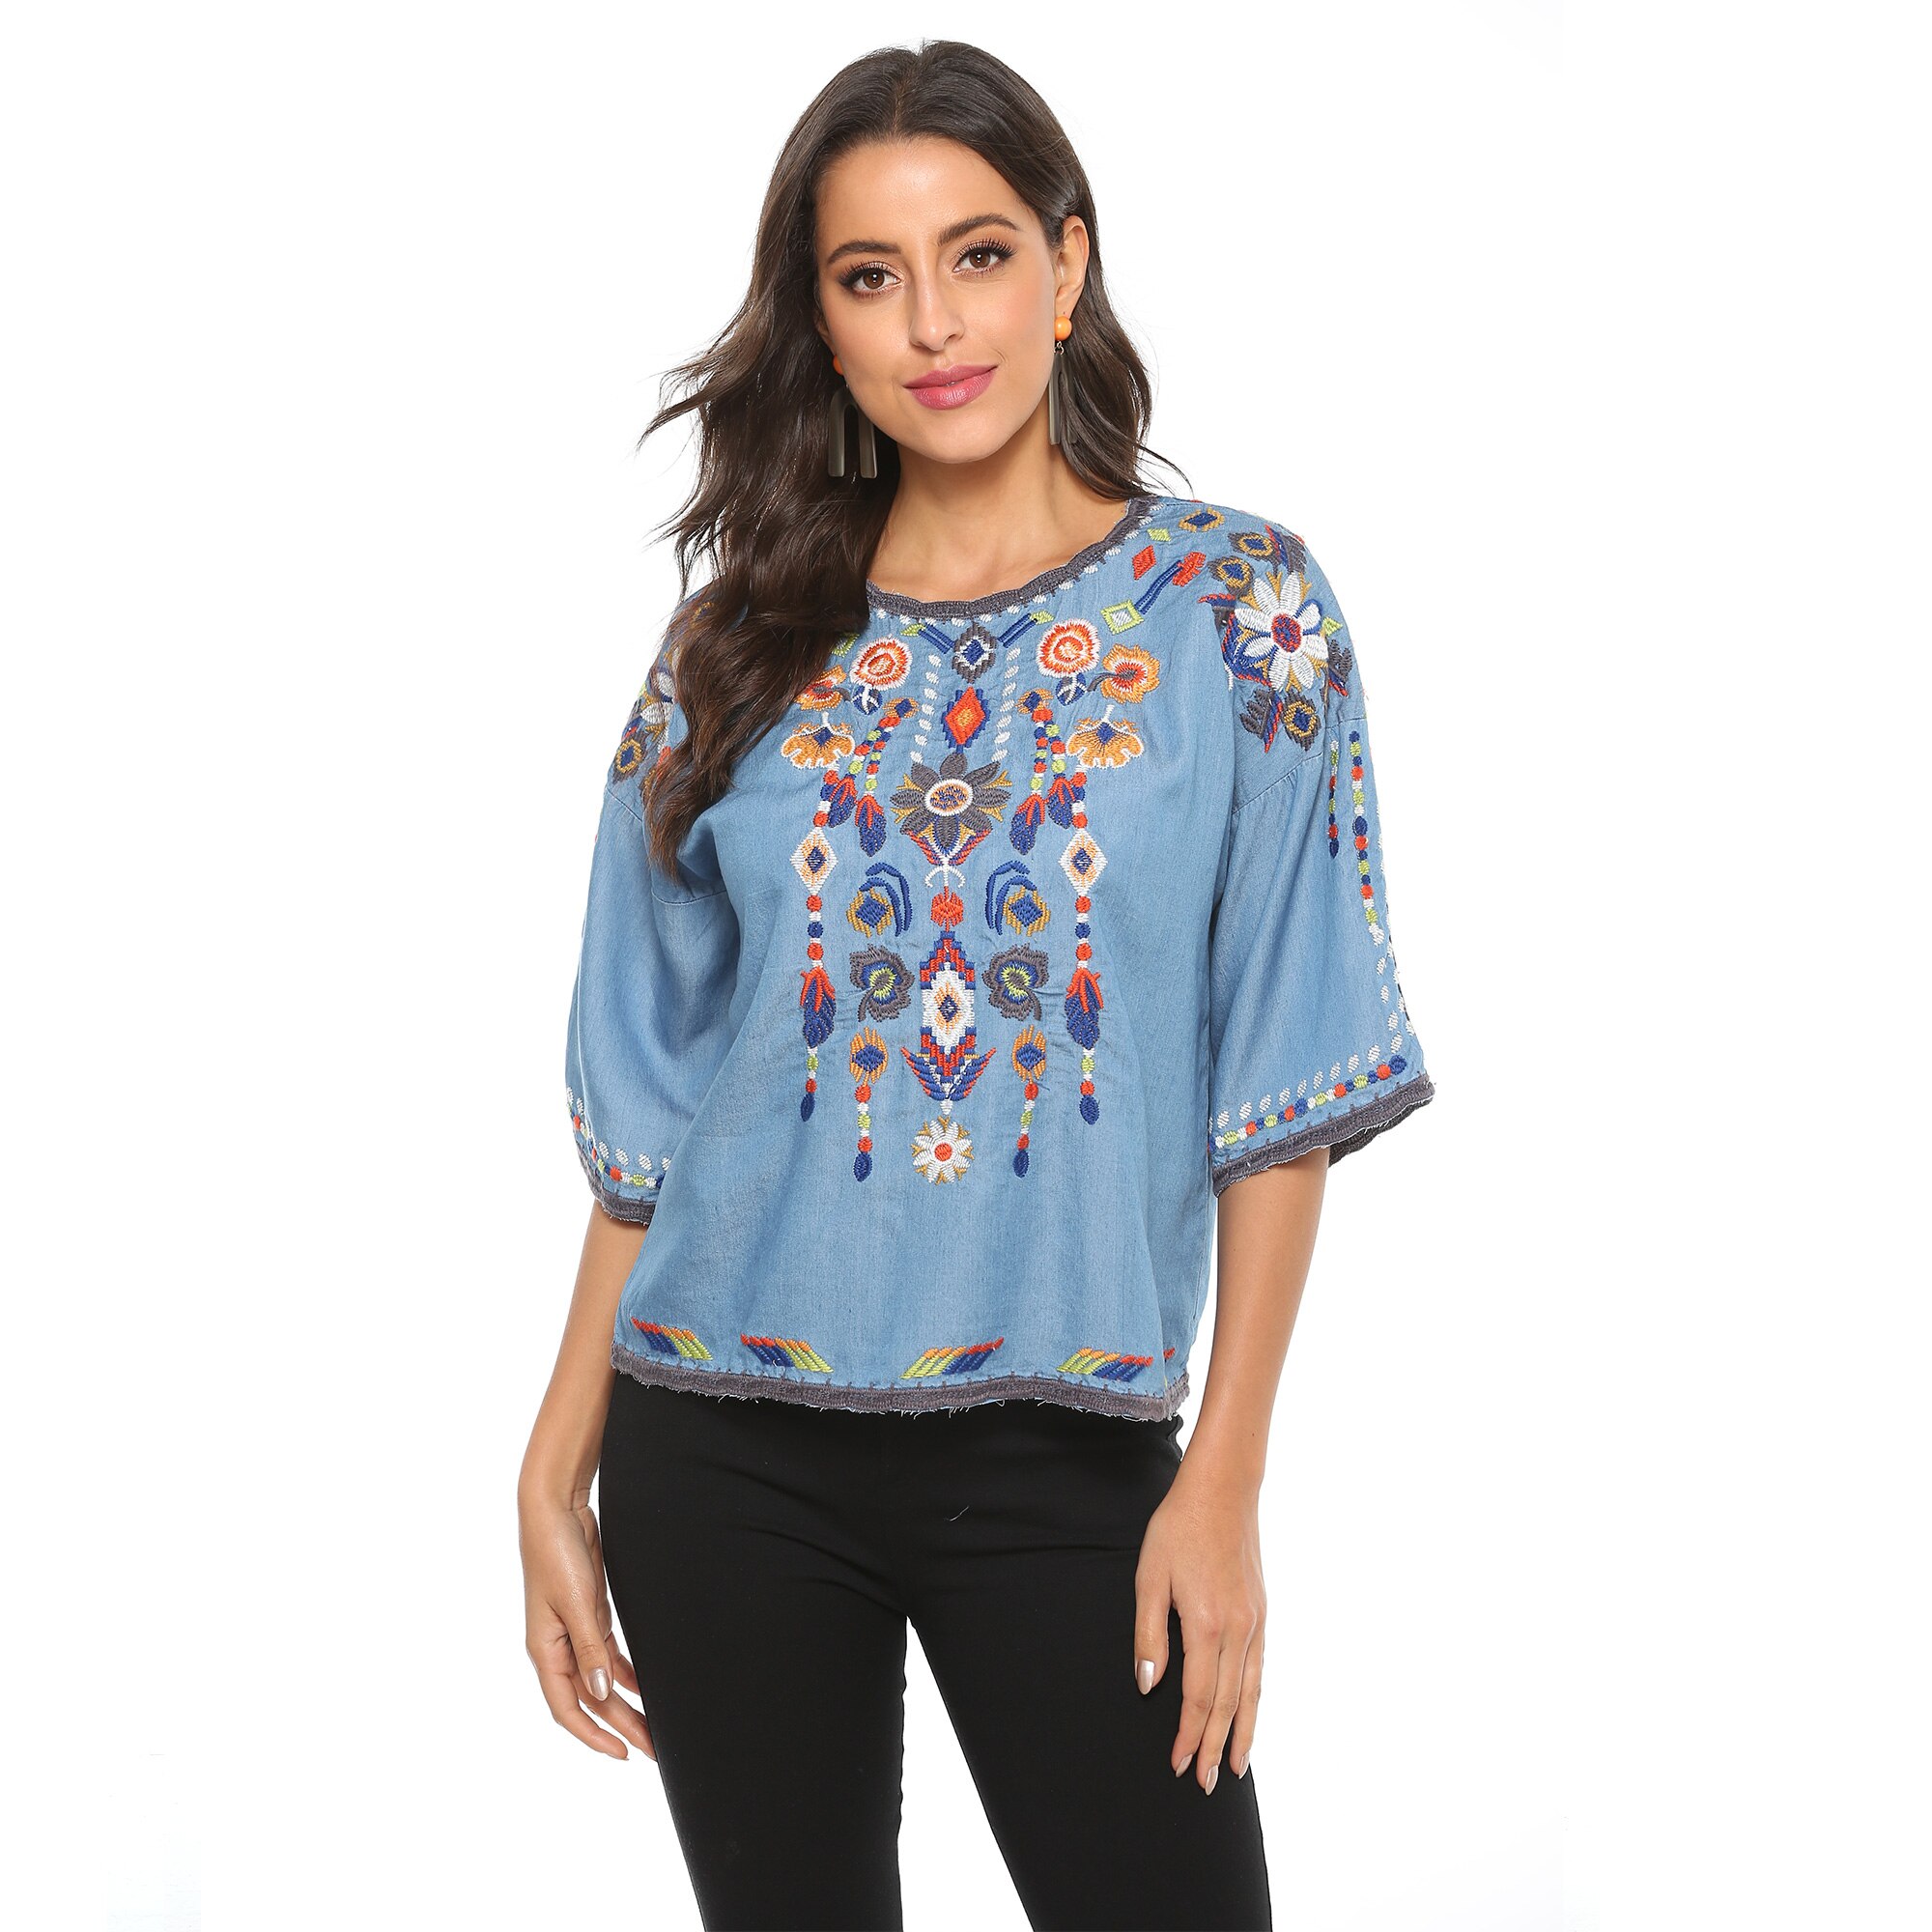 Eaeovni Women’s Summer Boho Embroidered Mexican Shirts long Sleeve Casual Tops Blouse Denim Peasant Blouse alx